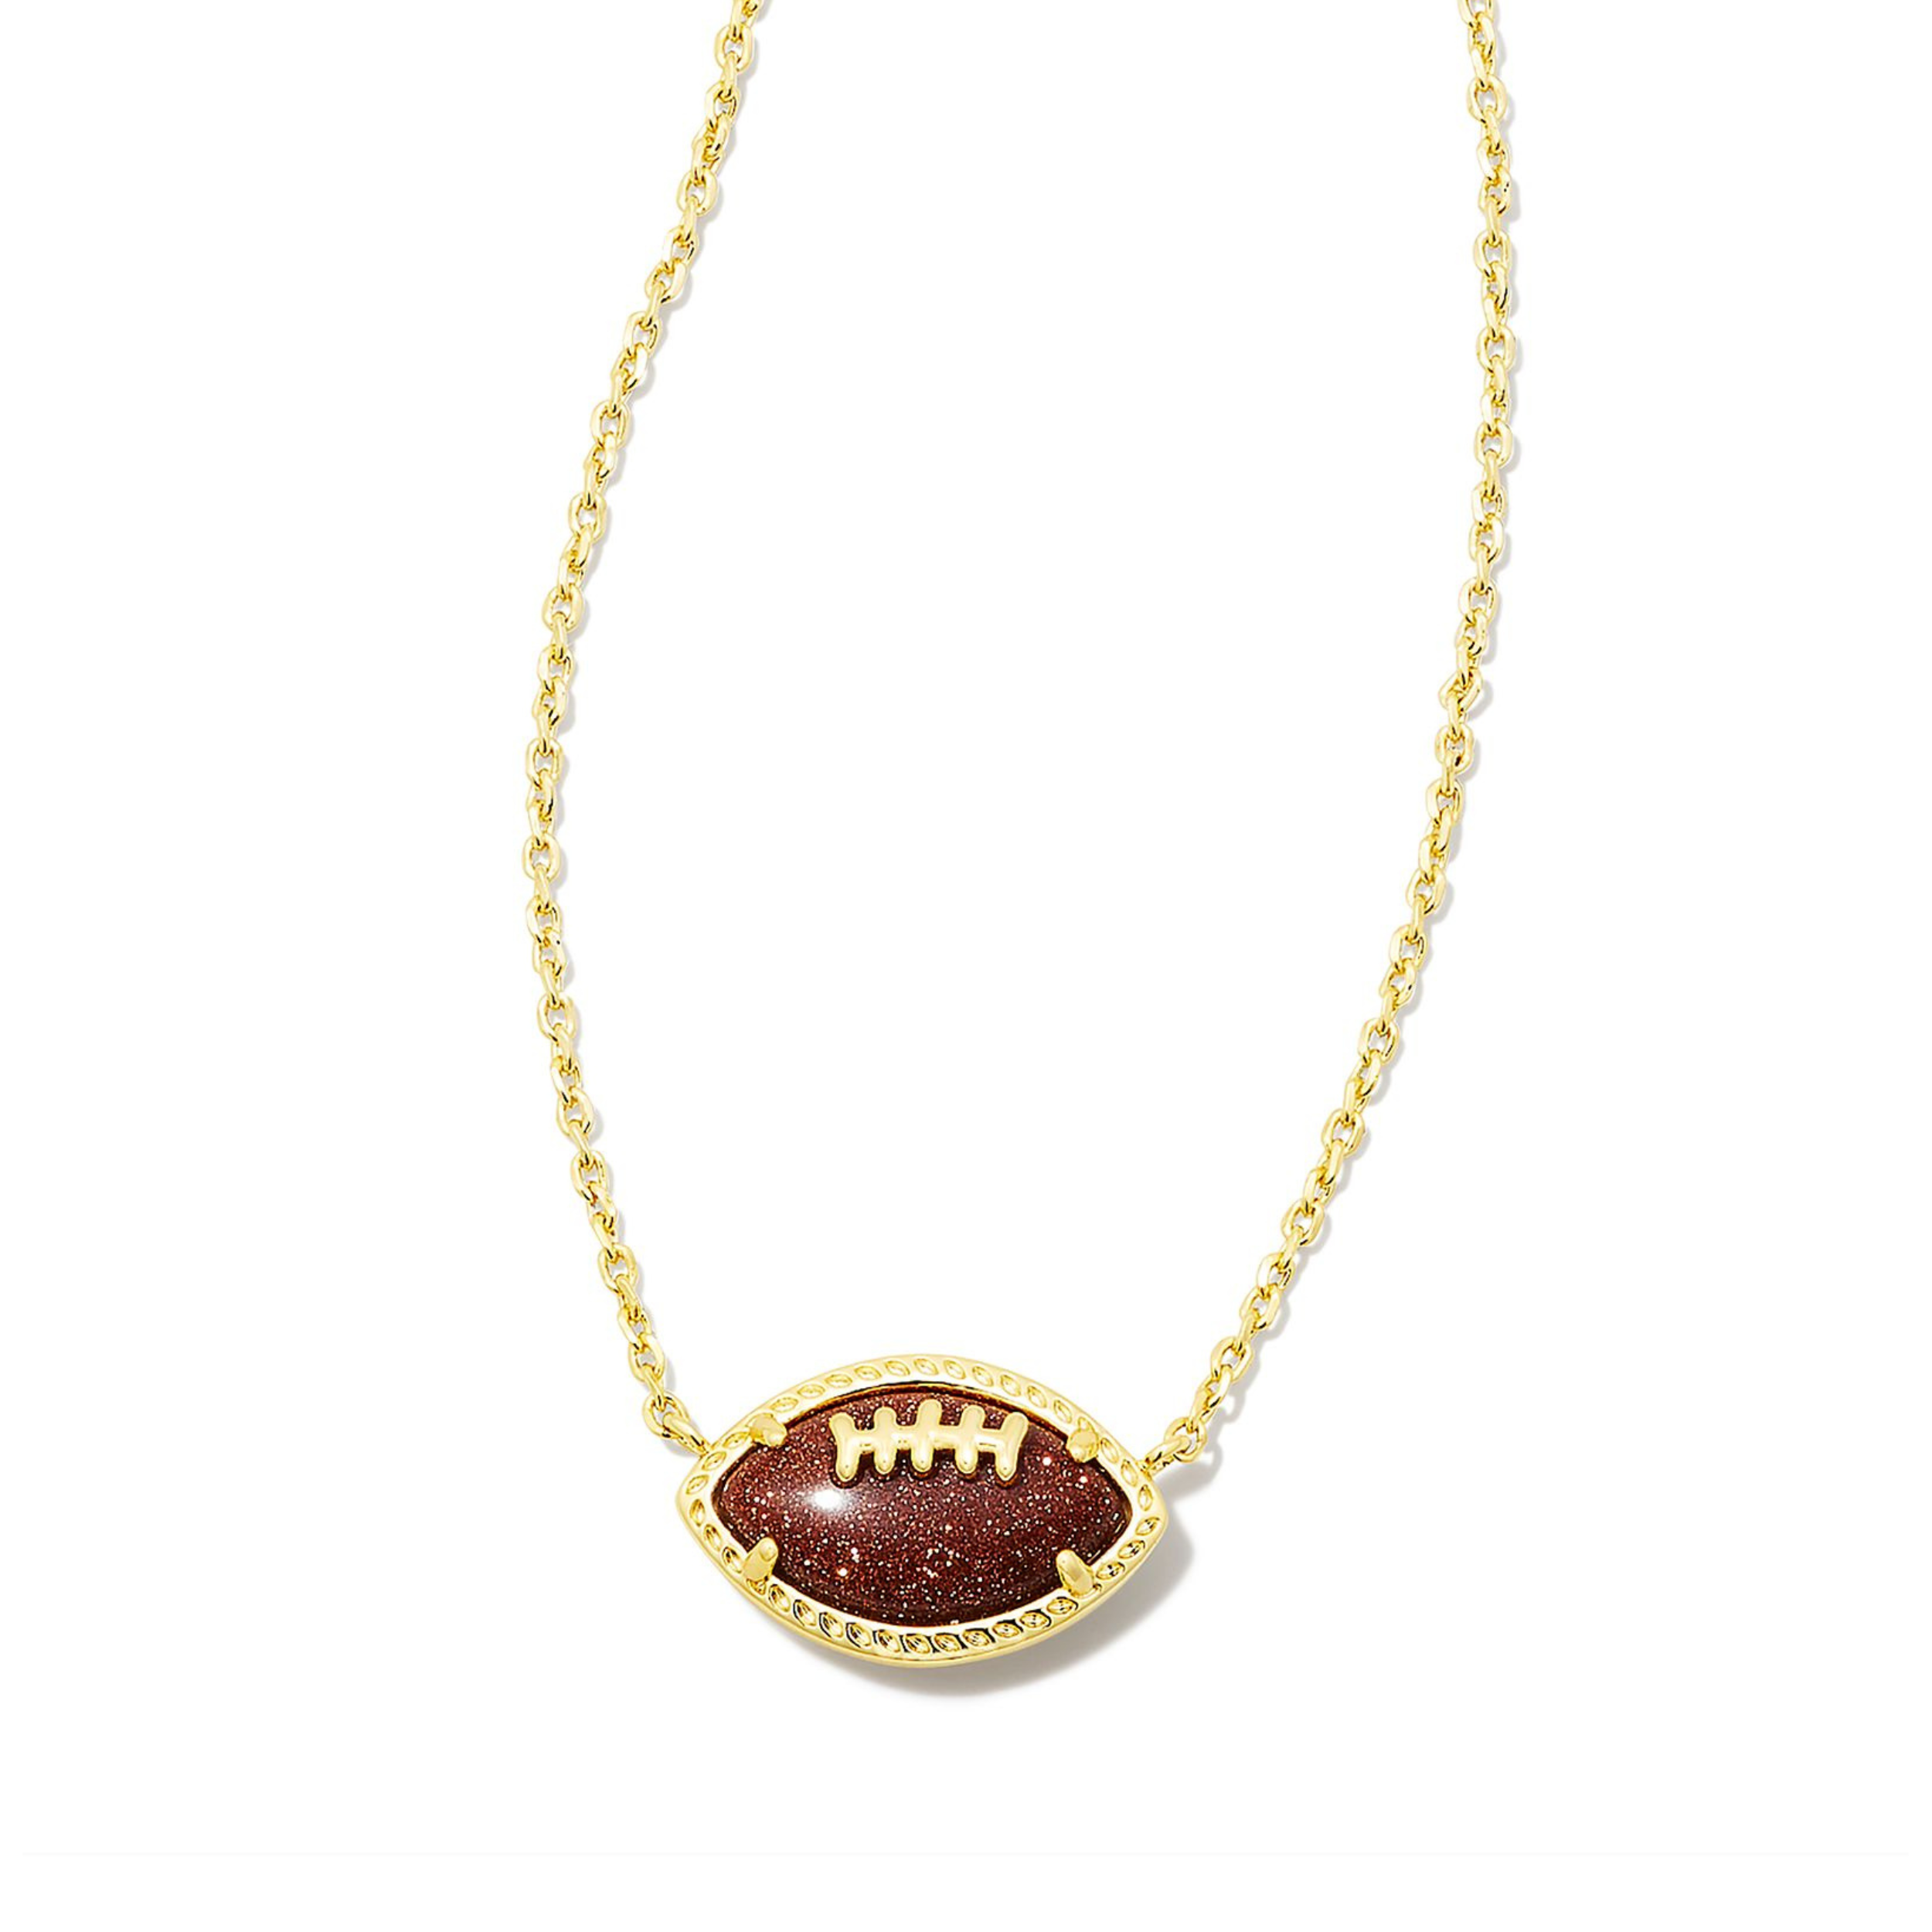 Gold chain necklace with brown football pendant pictured on a white background. 